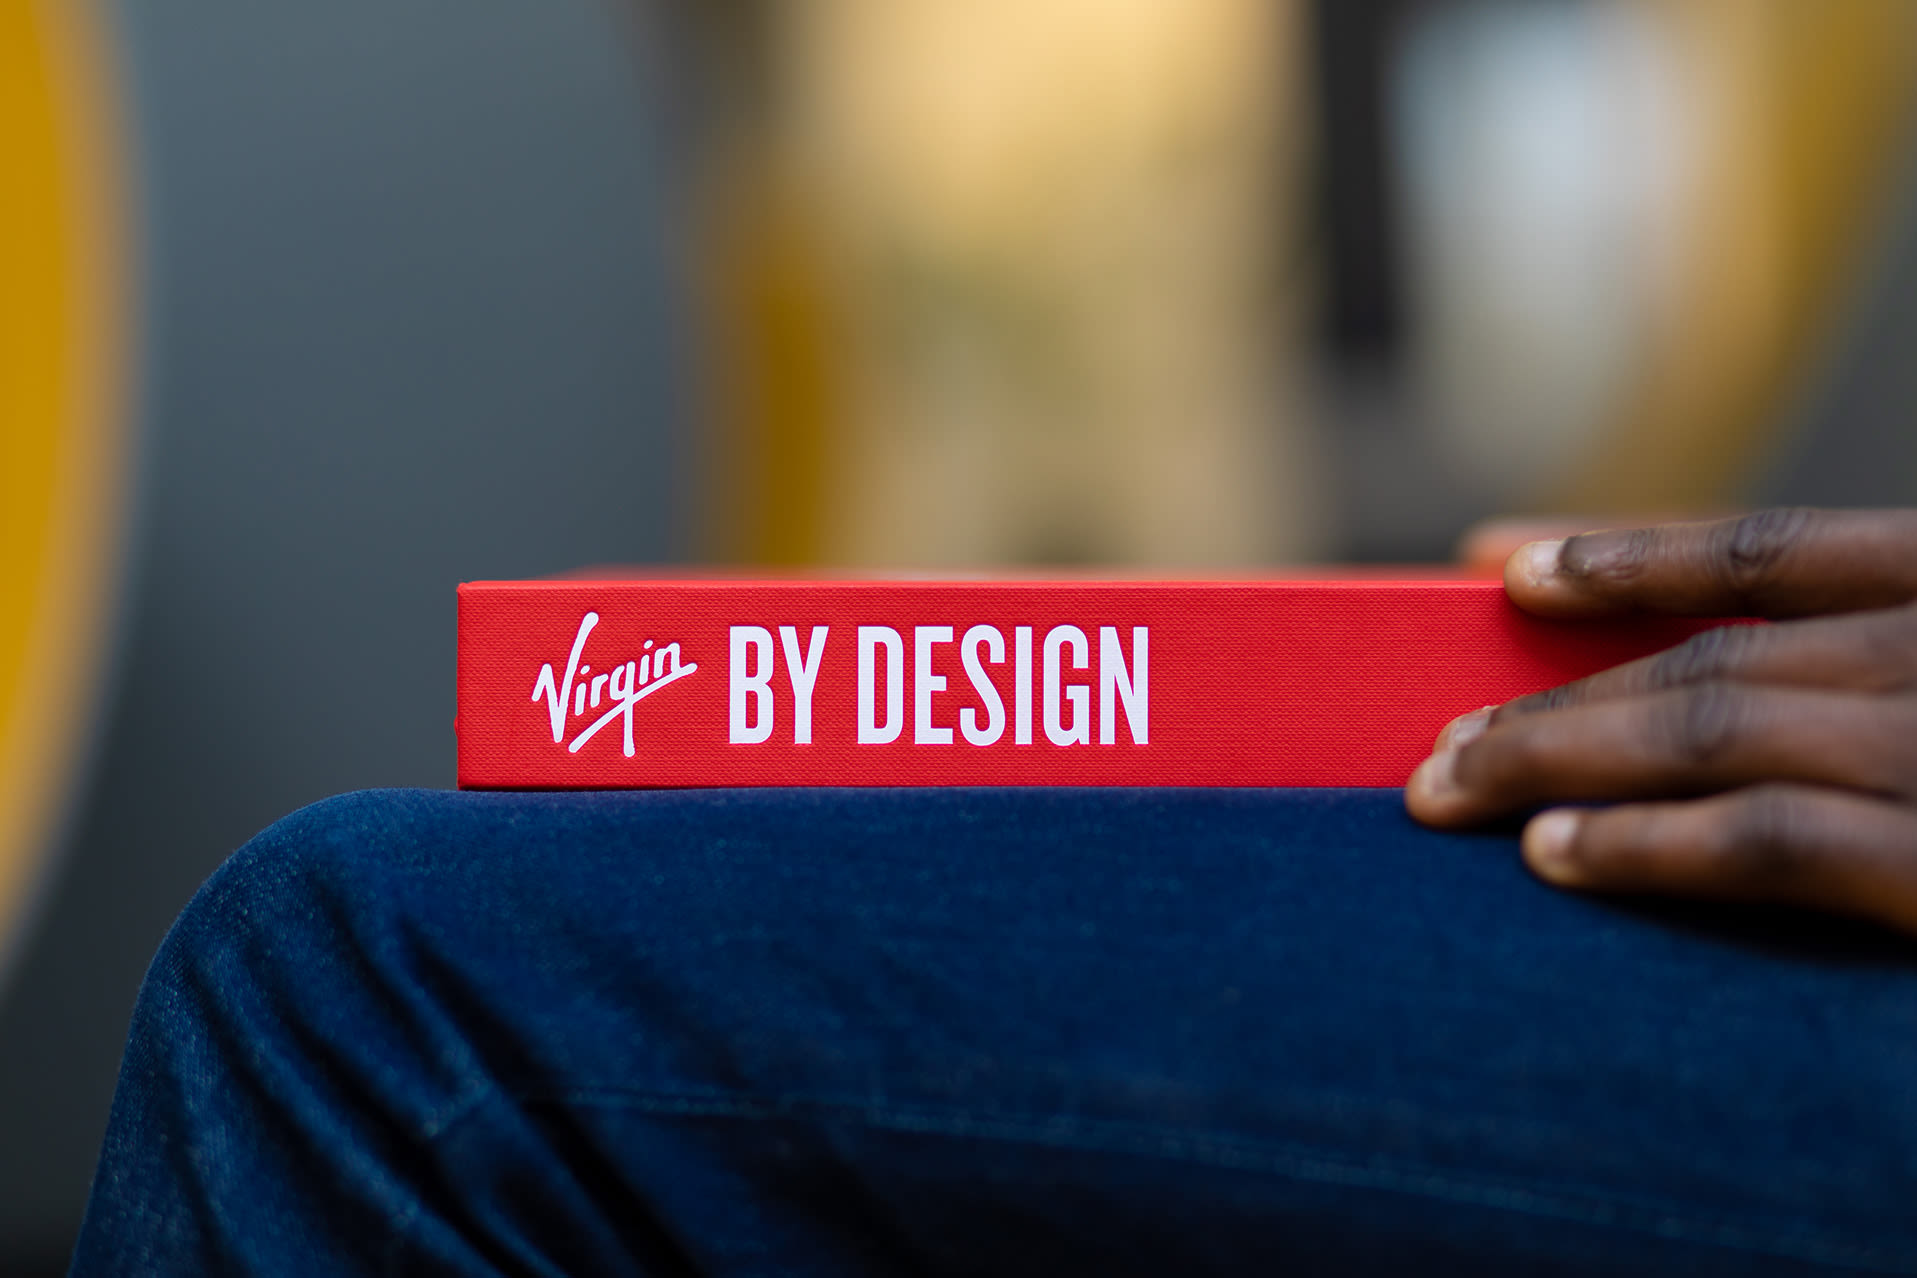 'Virgin by Design' book on someone's knee, just the spine is visible. It is a red cover with the title in white.